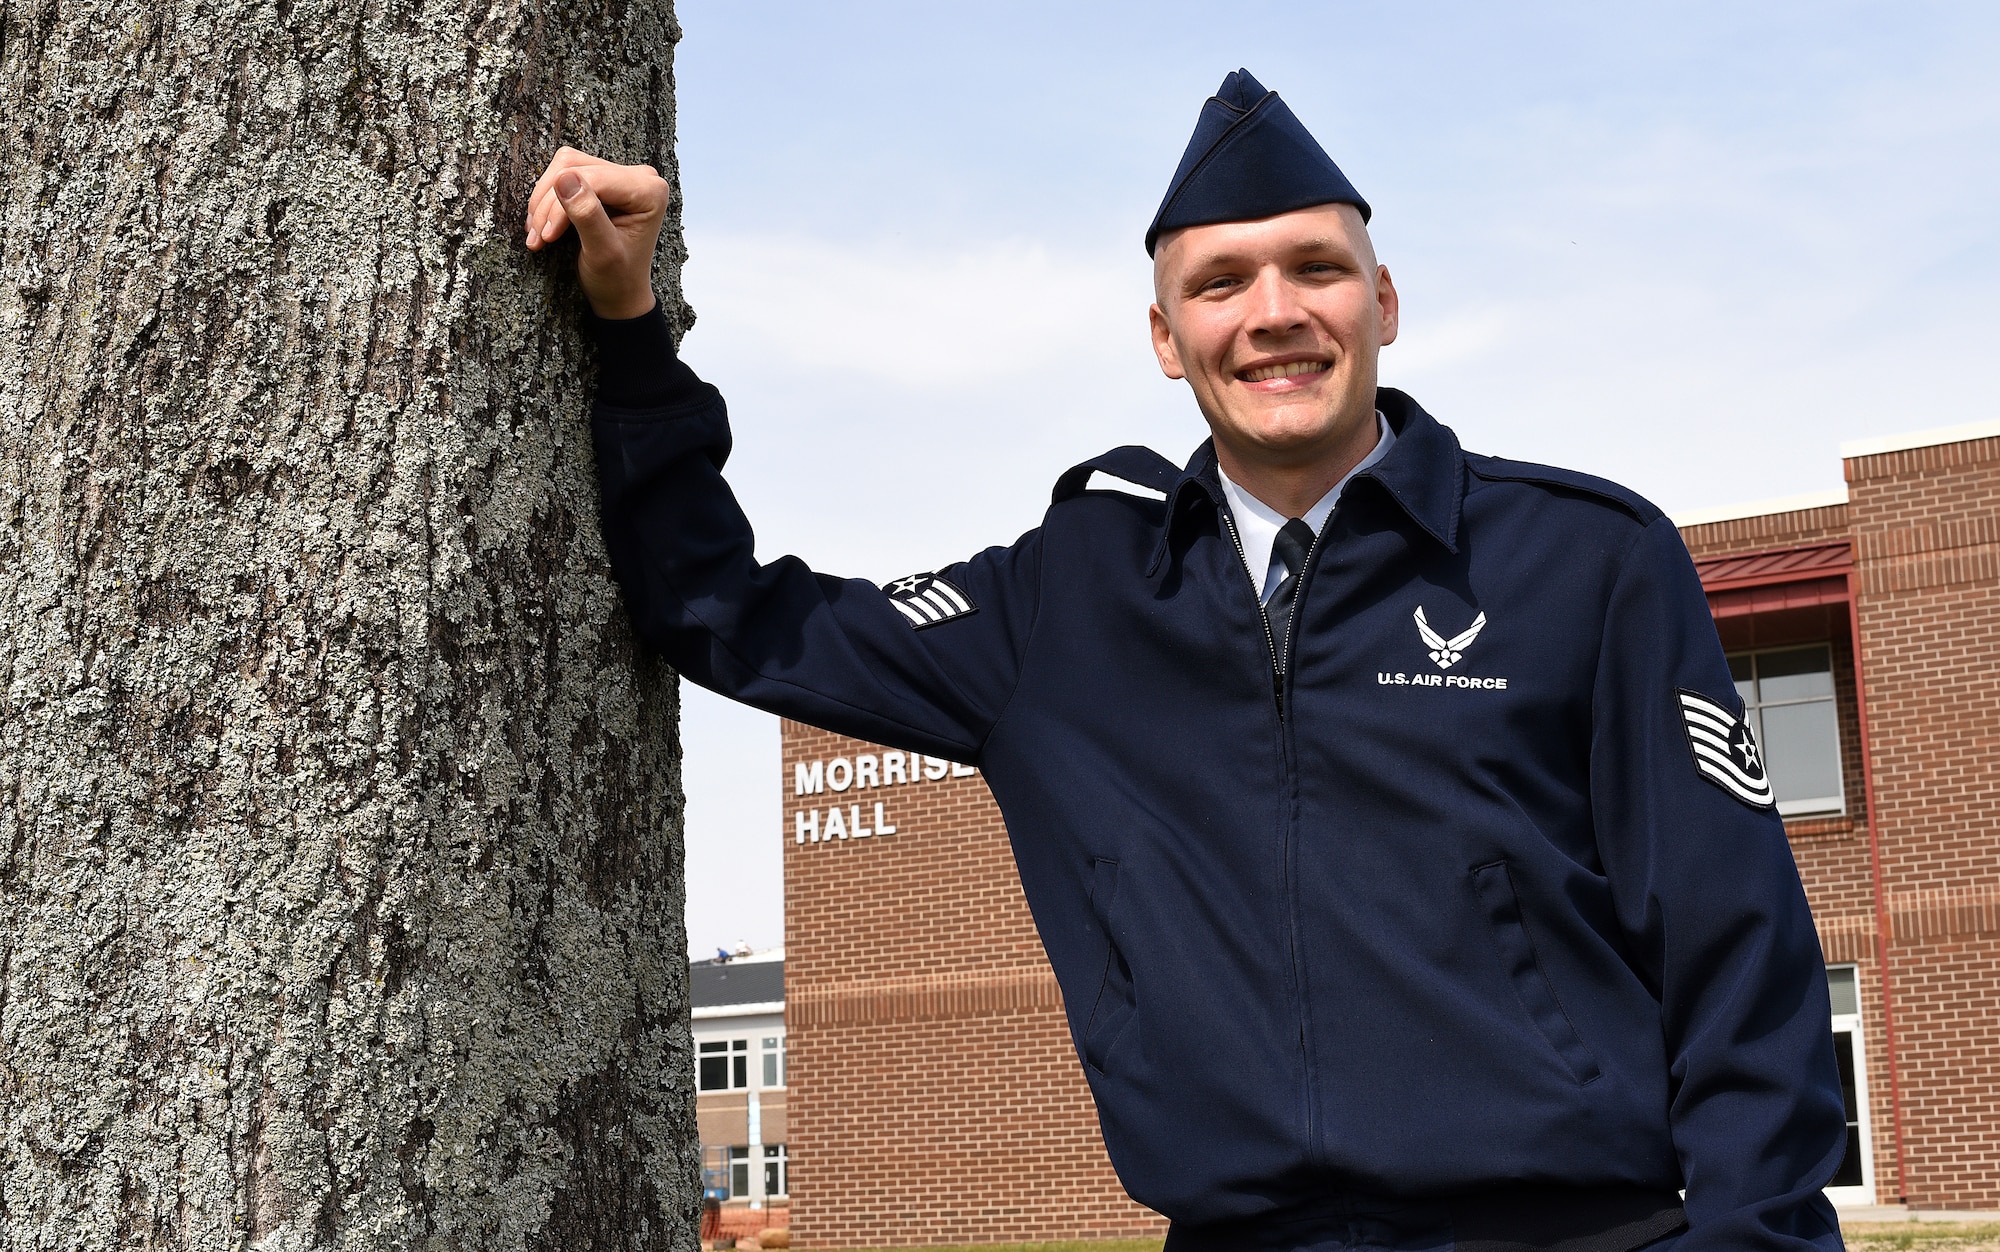 MCGHEE TYSON AIR NATIONAL GUARD BASE, Tenn. - Tech. Sgt. John C. McClean stops on campus, just outside the Morrisey Hall classroom building, while on his way to teach Air Force enlisted professional military education. McClean is a regular Air Force chaplain assistant assigned as an instructor to the Paul H. Lankford EPME Center. (U.S. Air National Guard photo by Master Sgt. Mike R. Smith/Released)